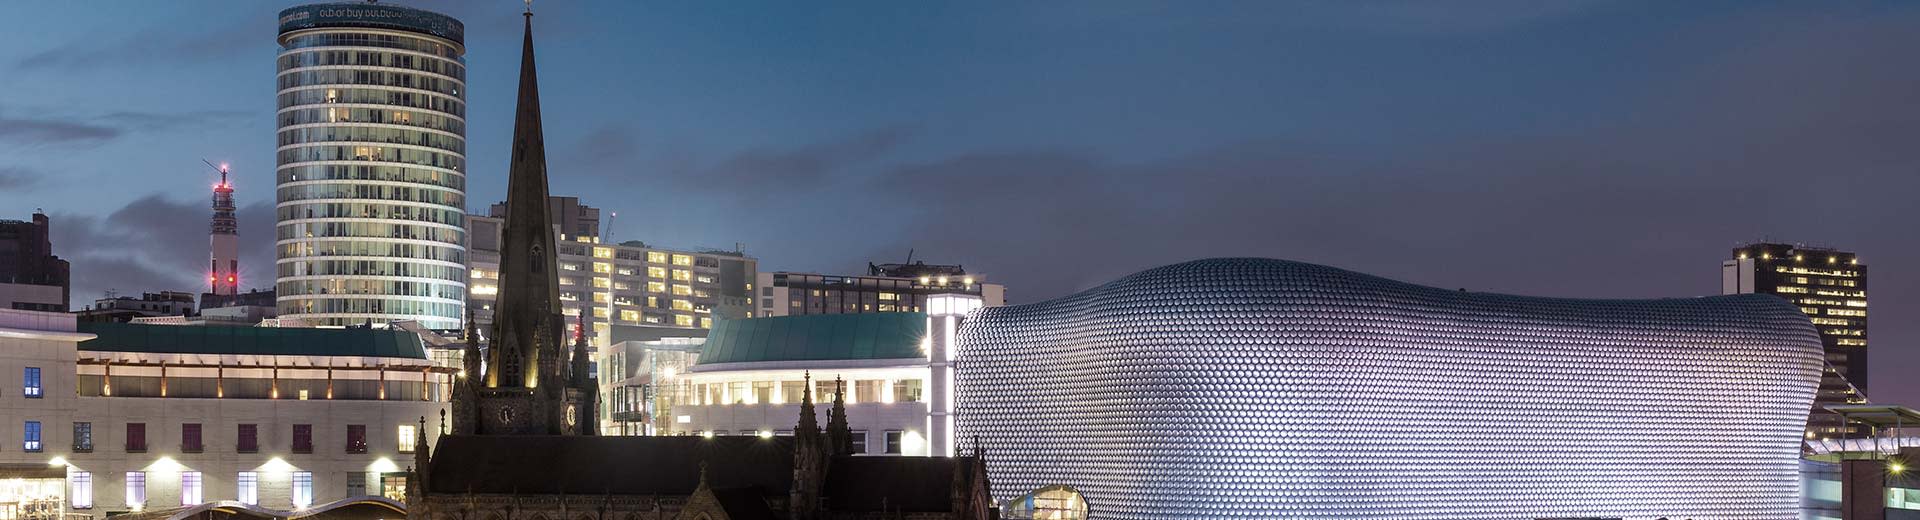 Birmingham during the evening with the Bull Ring on the right and a church on the left.